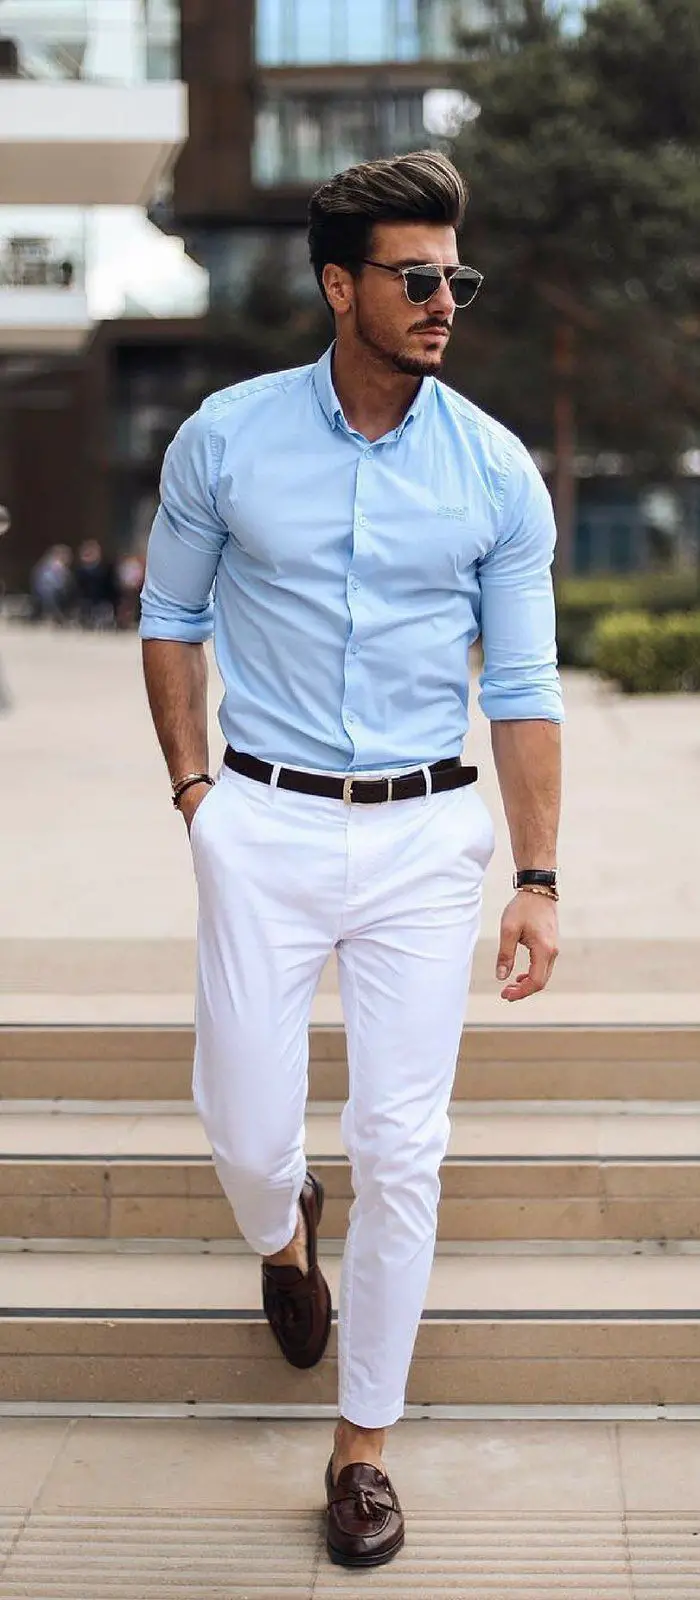 Business casual aesthetic shirts for men